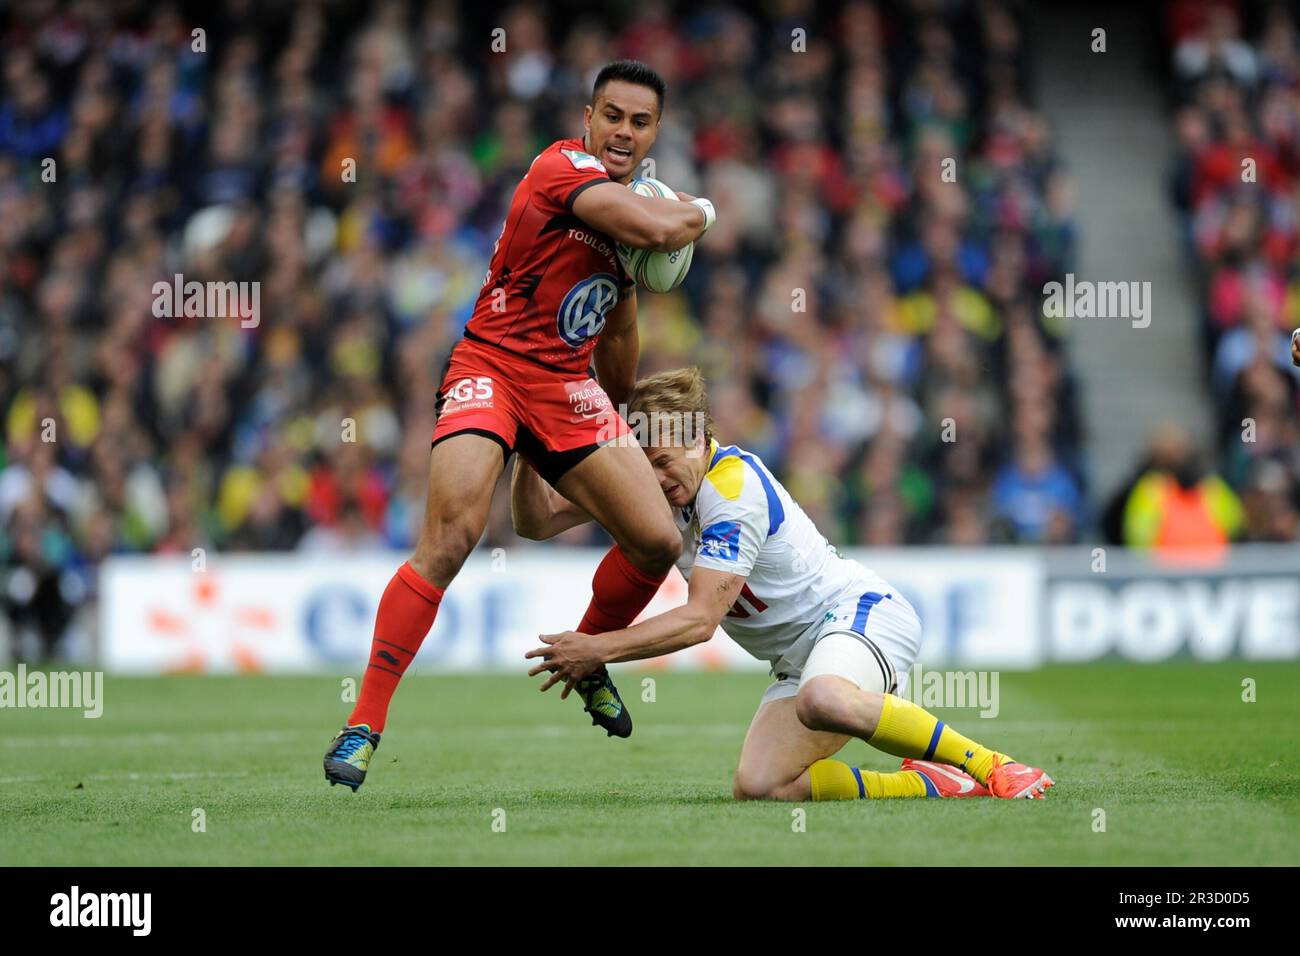 Rudi Wulf of RC Toulon charges through the tackle of Aurelien Rougerie of ASM Clermont Auvergne during the Heineken Cup Final between ASM Clermont Auv Stock Photo